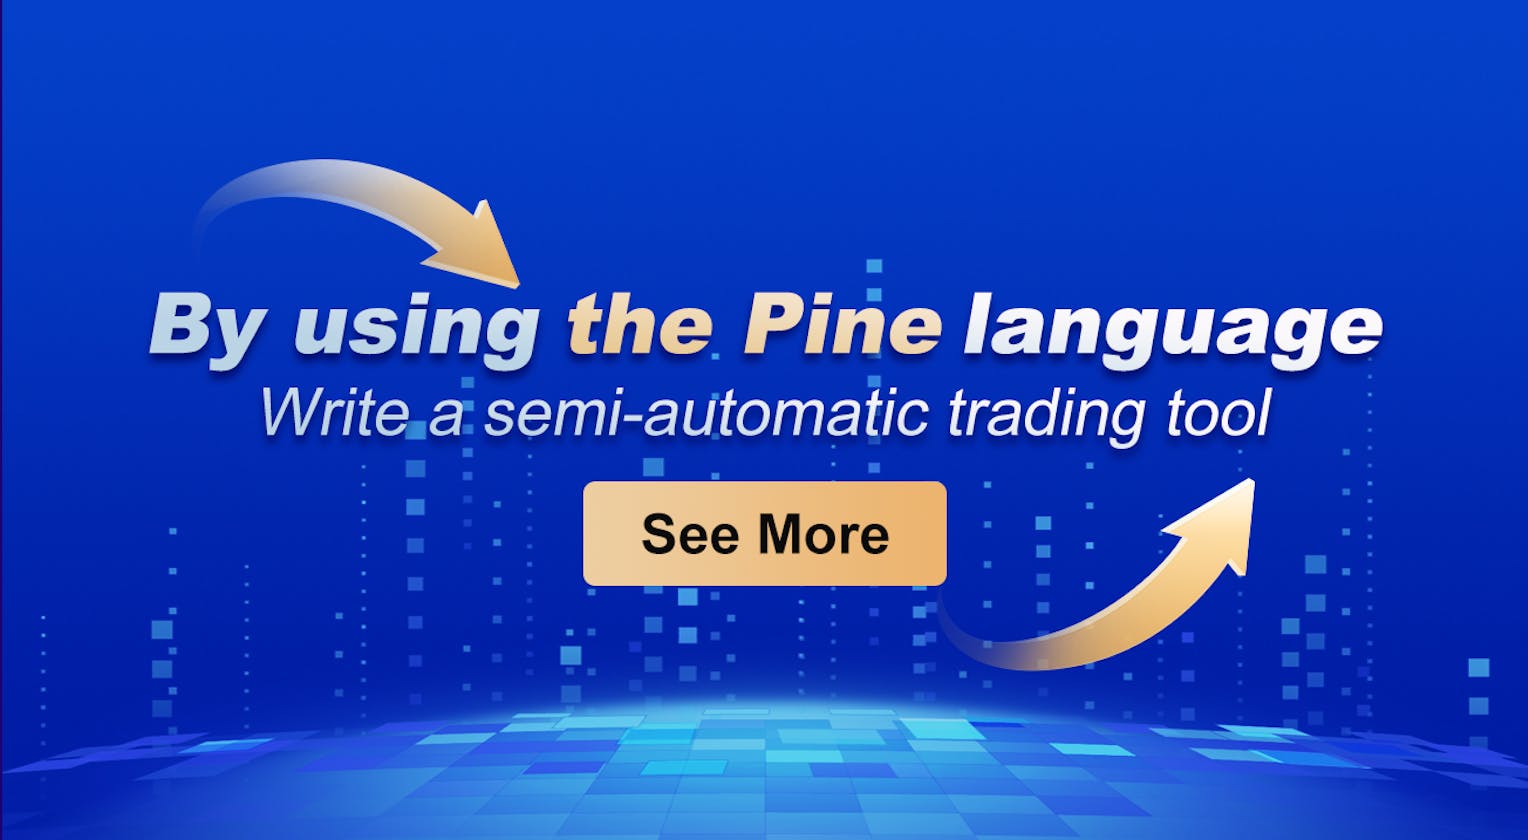 Write a semi-automatic trading tool by using the Pine language